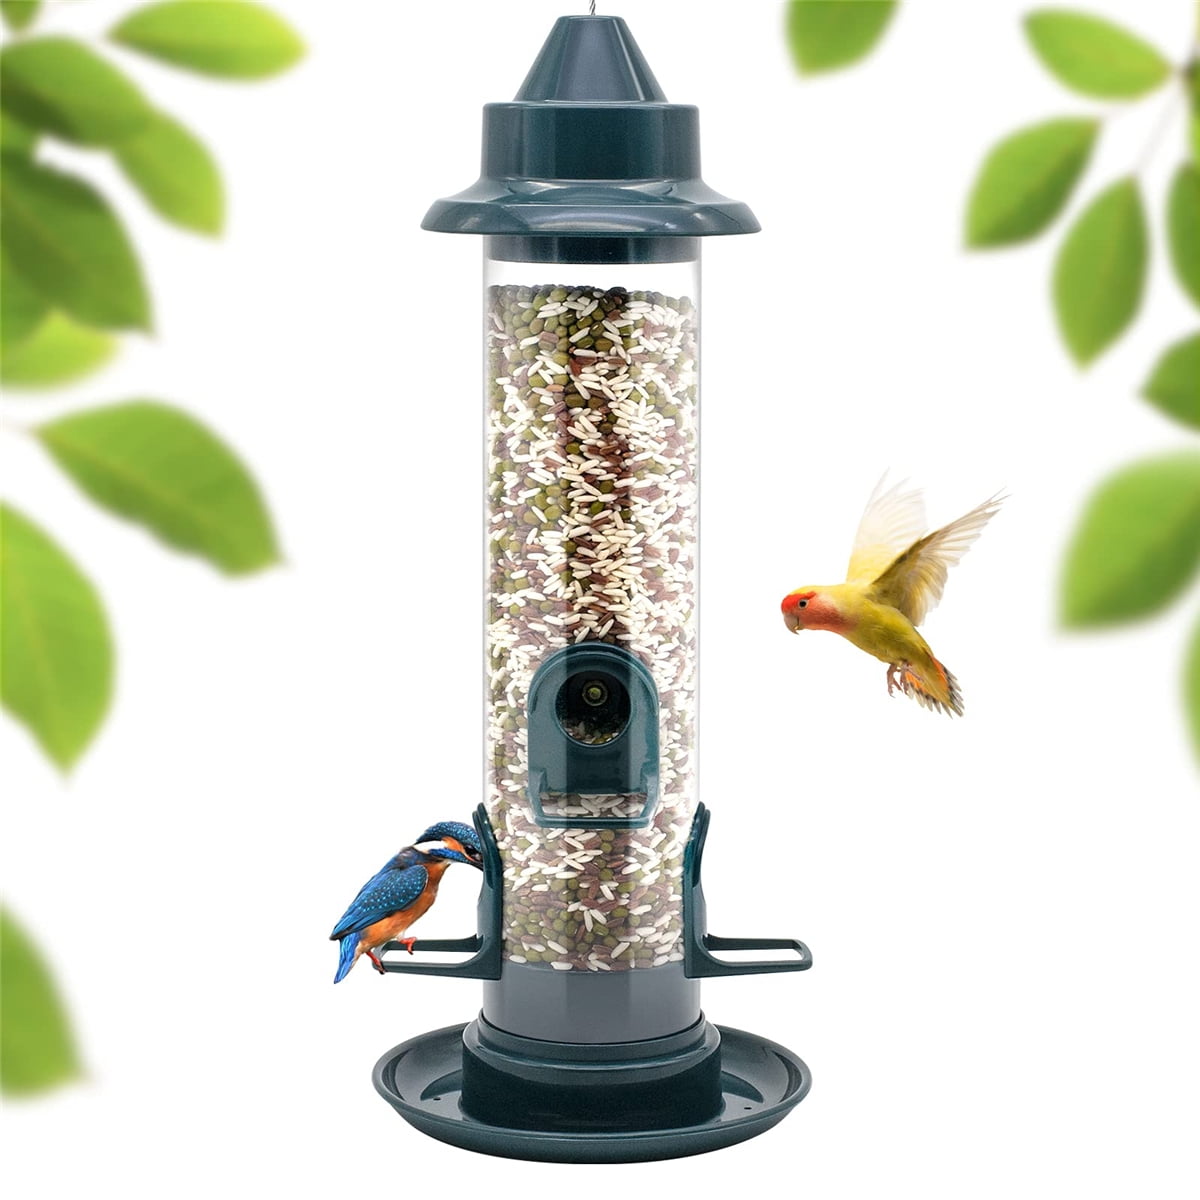 Bird Feeder Classic Tube Hanging Feeders for Finches Bird Seed and Gardens 